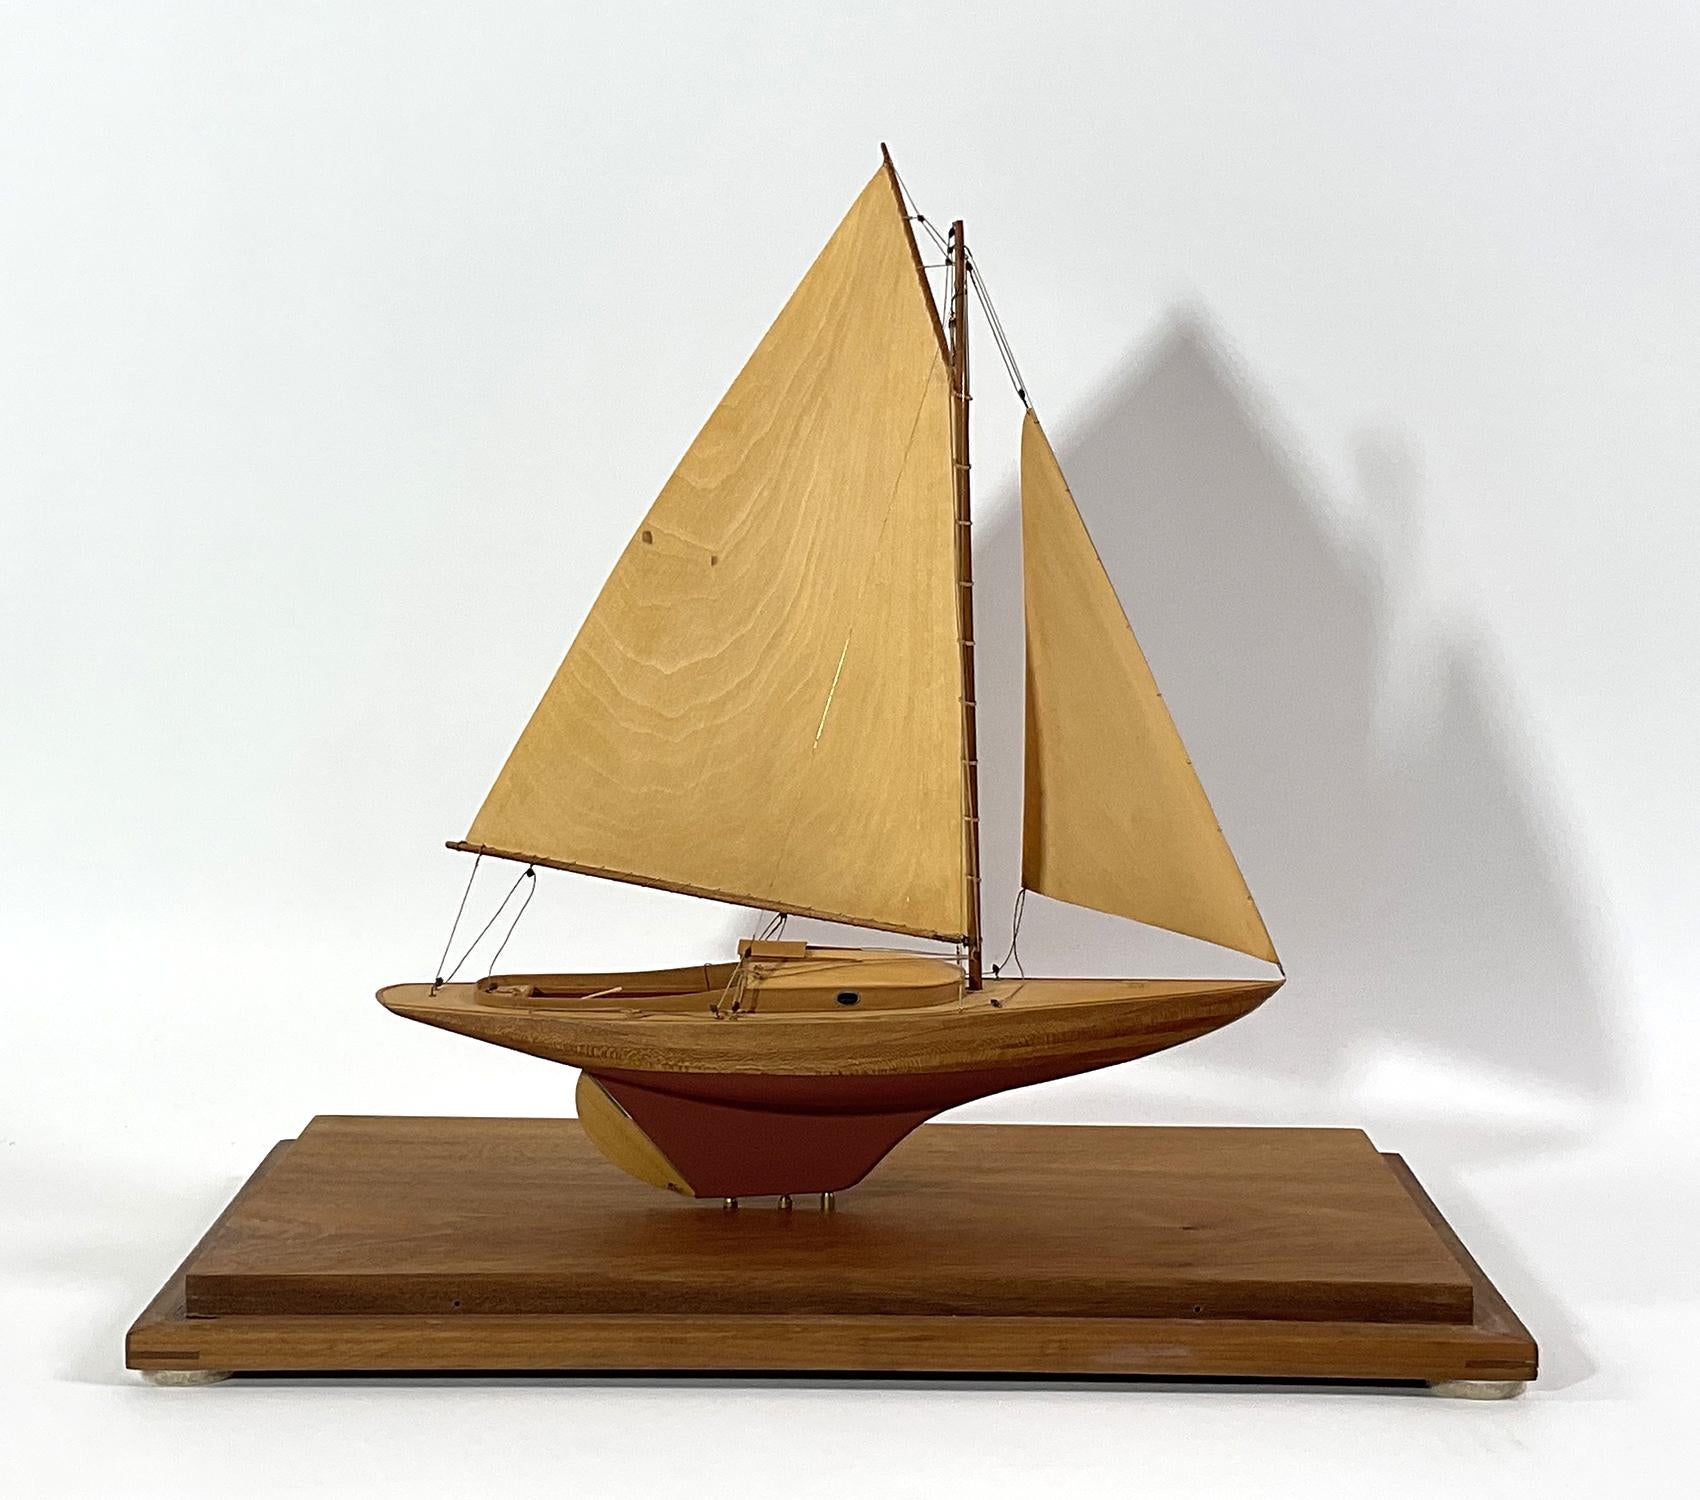 Well crafted model of a Wianno Senior. With laminated mahogany hull. Carved birch sails. Sunken cockpit with bench. Very high quality model. Fitted to a custom case. Attributed to Rob Wadleigh. Circa 1980.